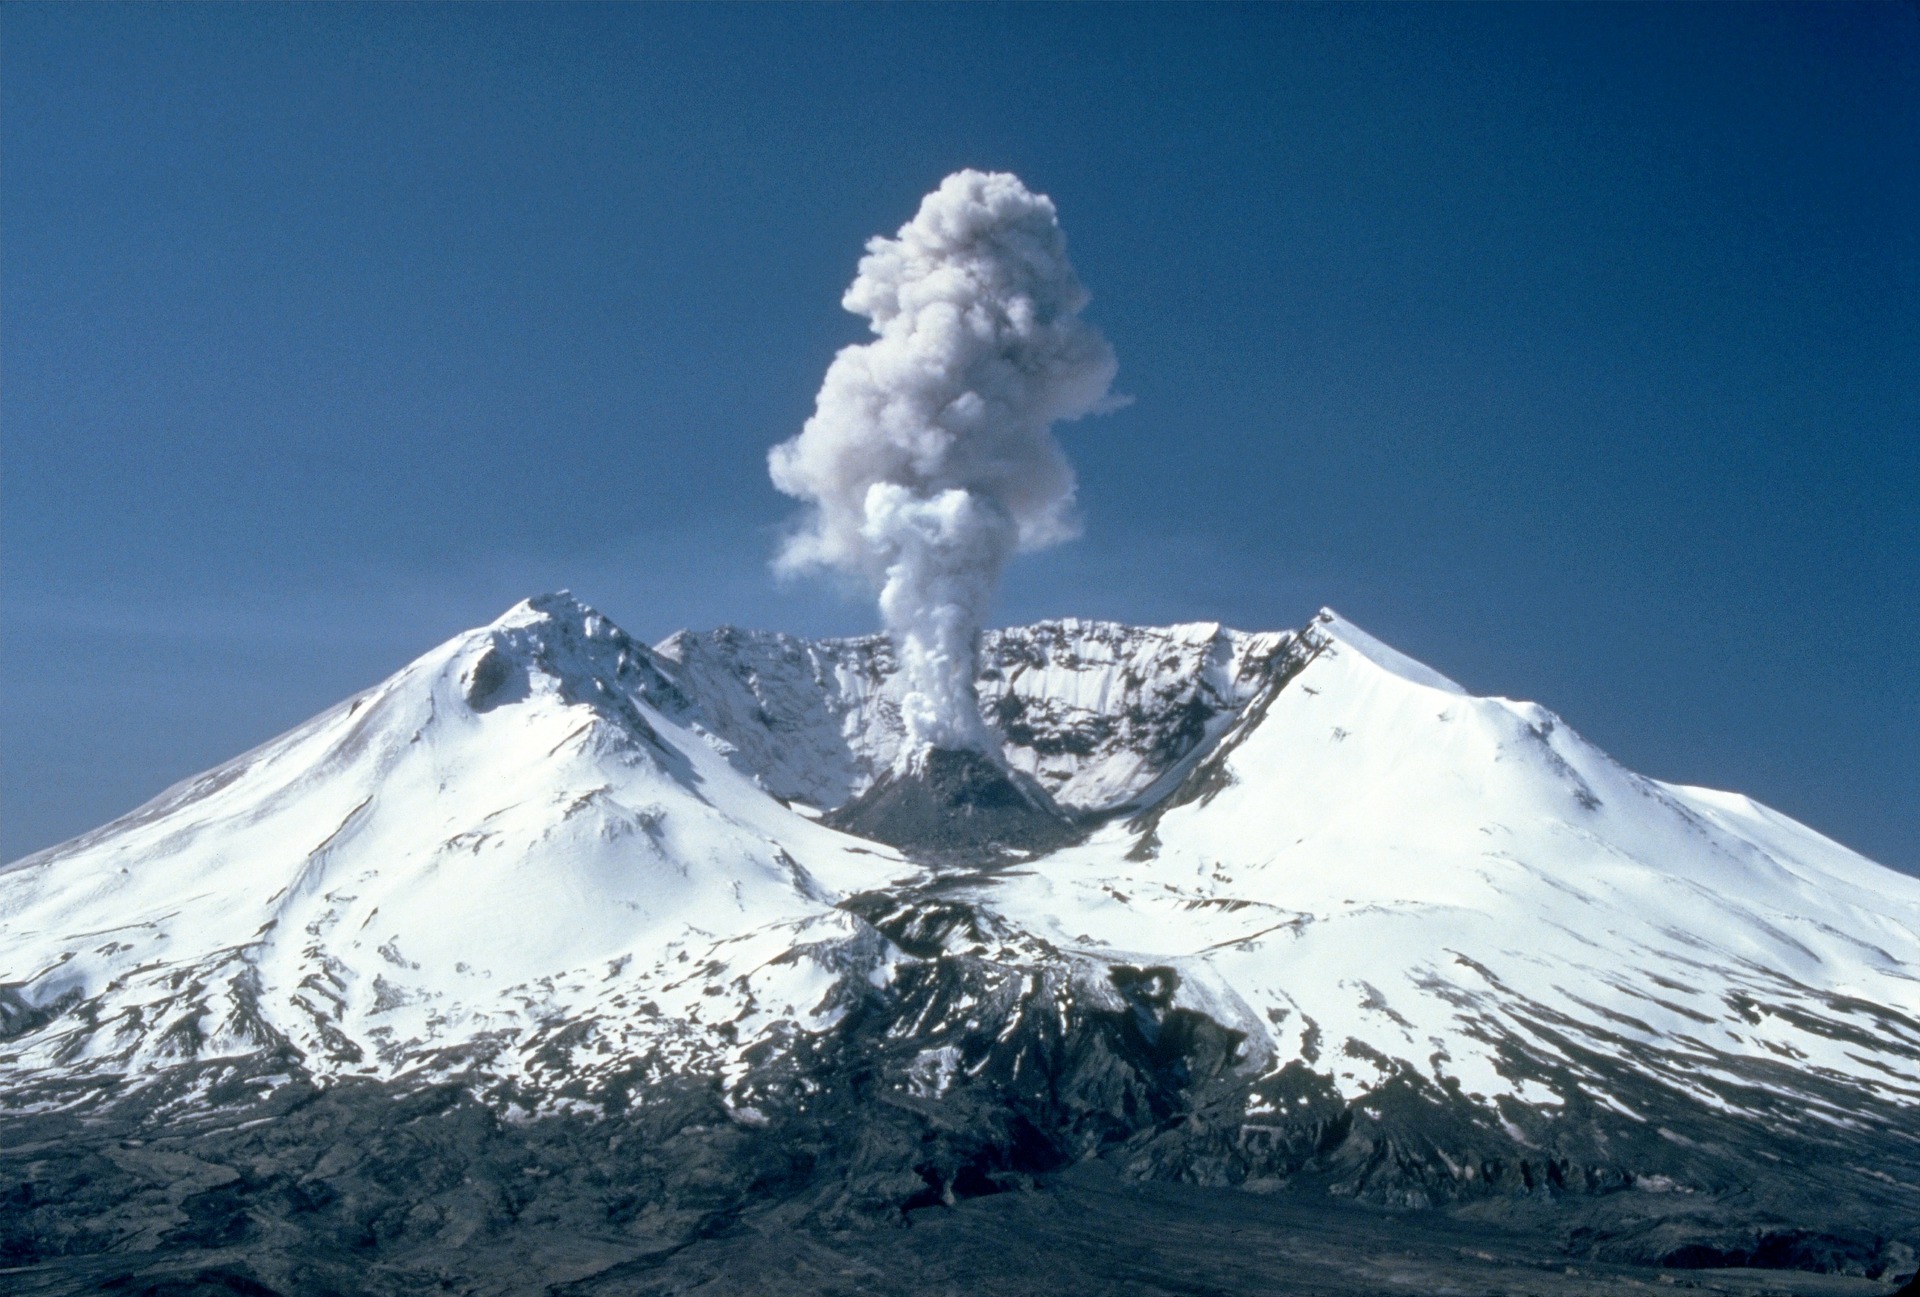 Mount St Helens - image by WikiImages @ pixabay.com